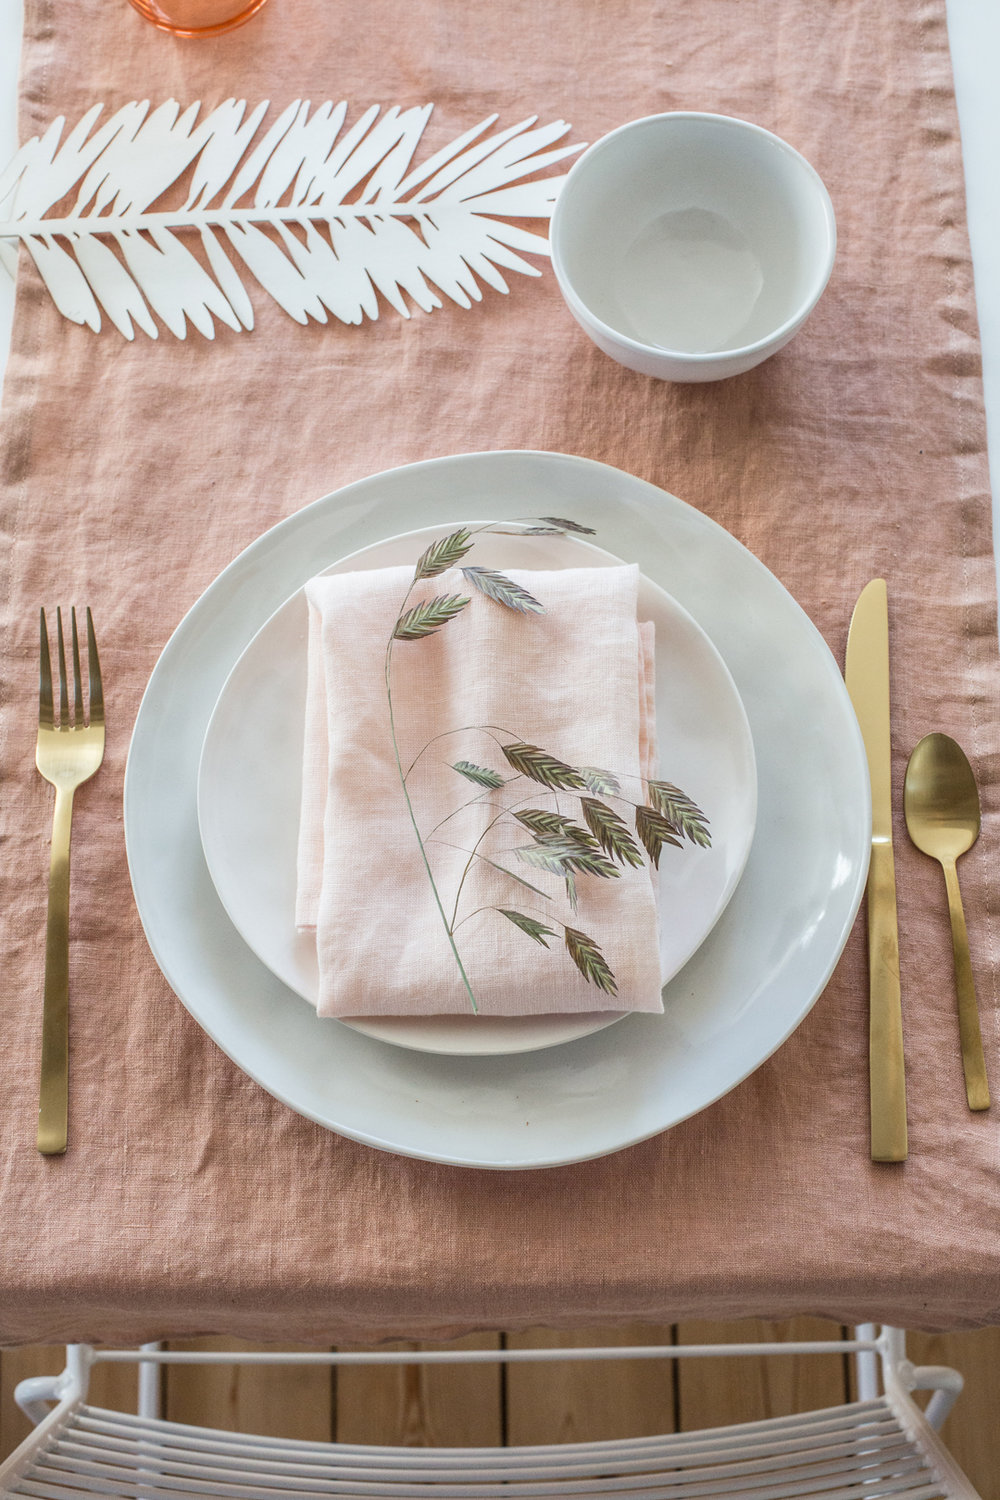 I love the table linens, the apricot runner with the pink napkins - they are really gorgeous together.